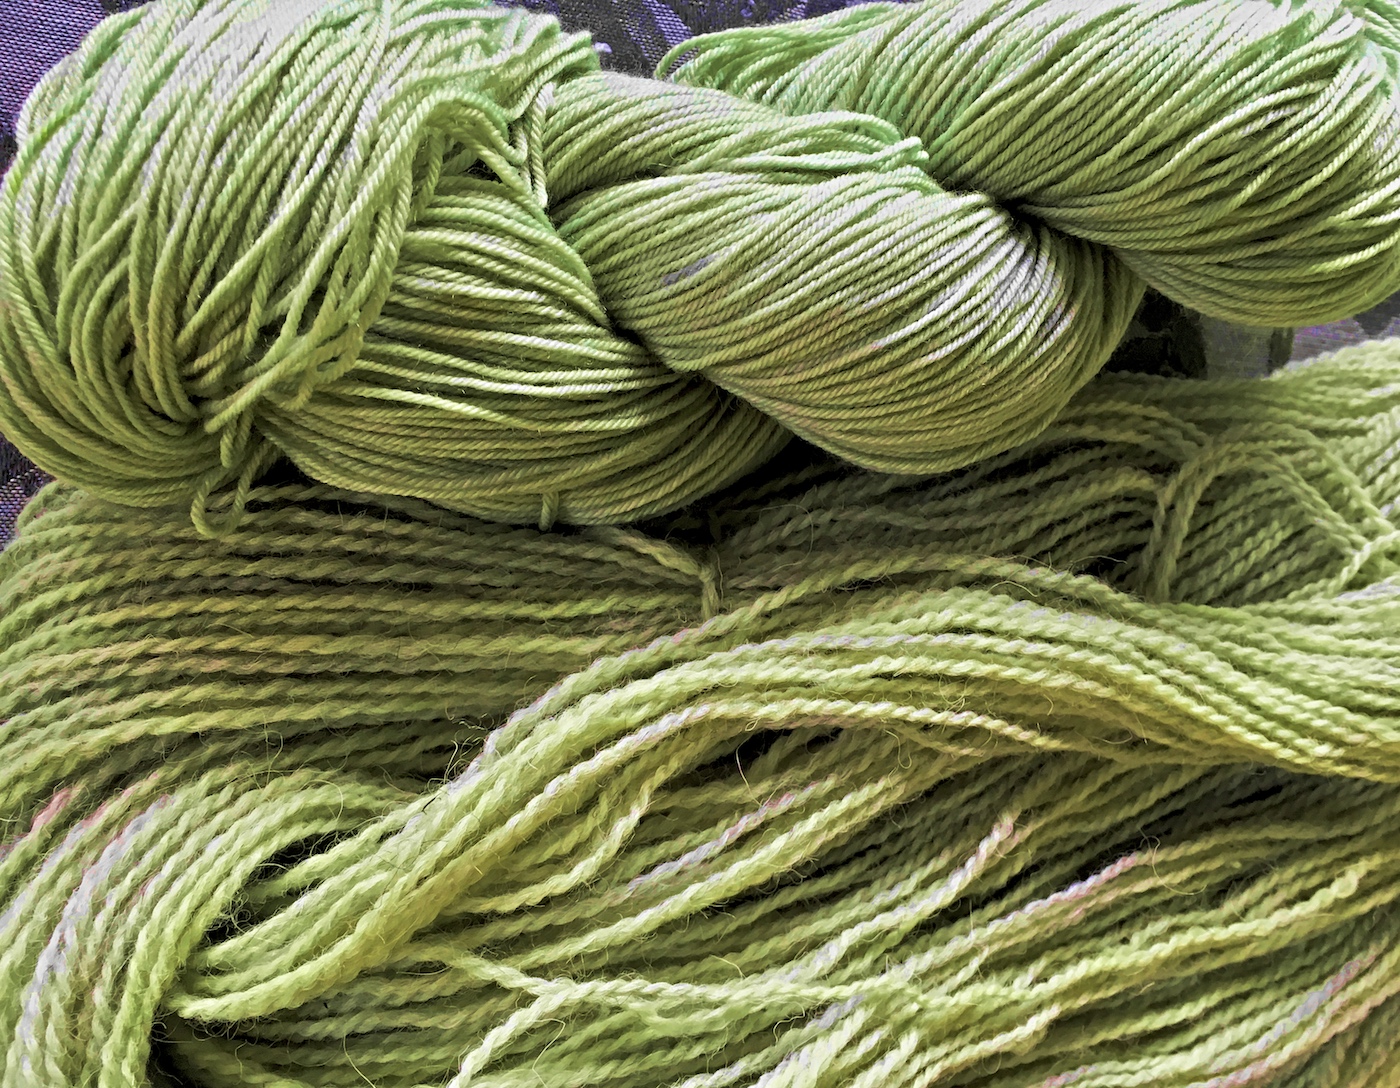 Green yarn dyed with black-eyed susans